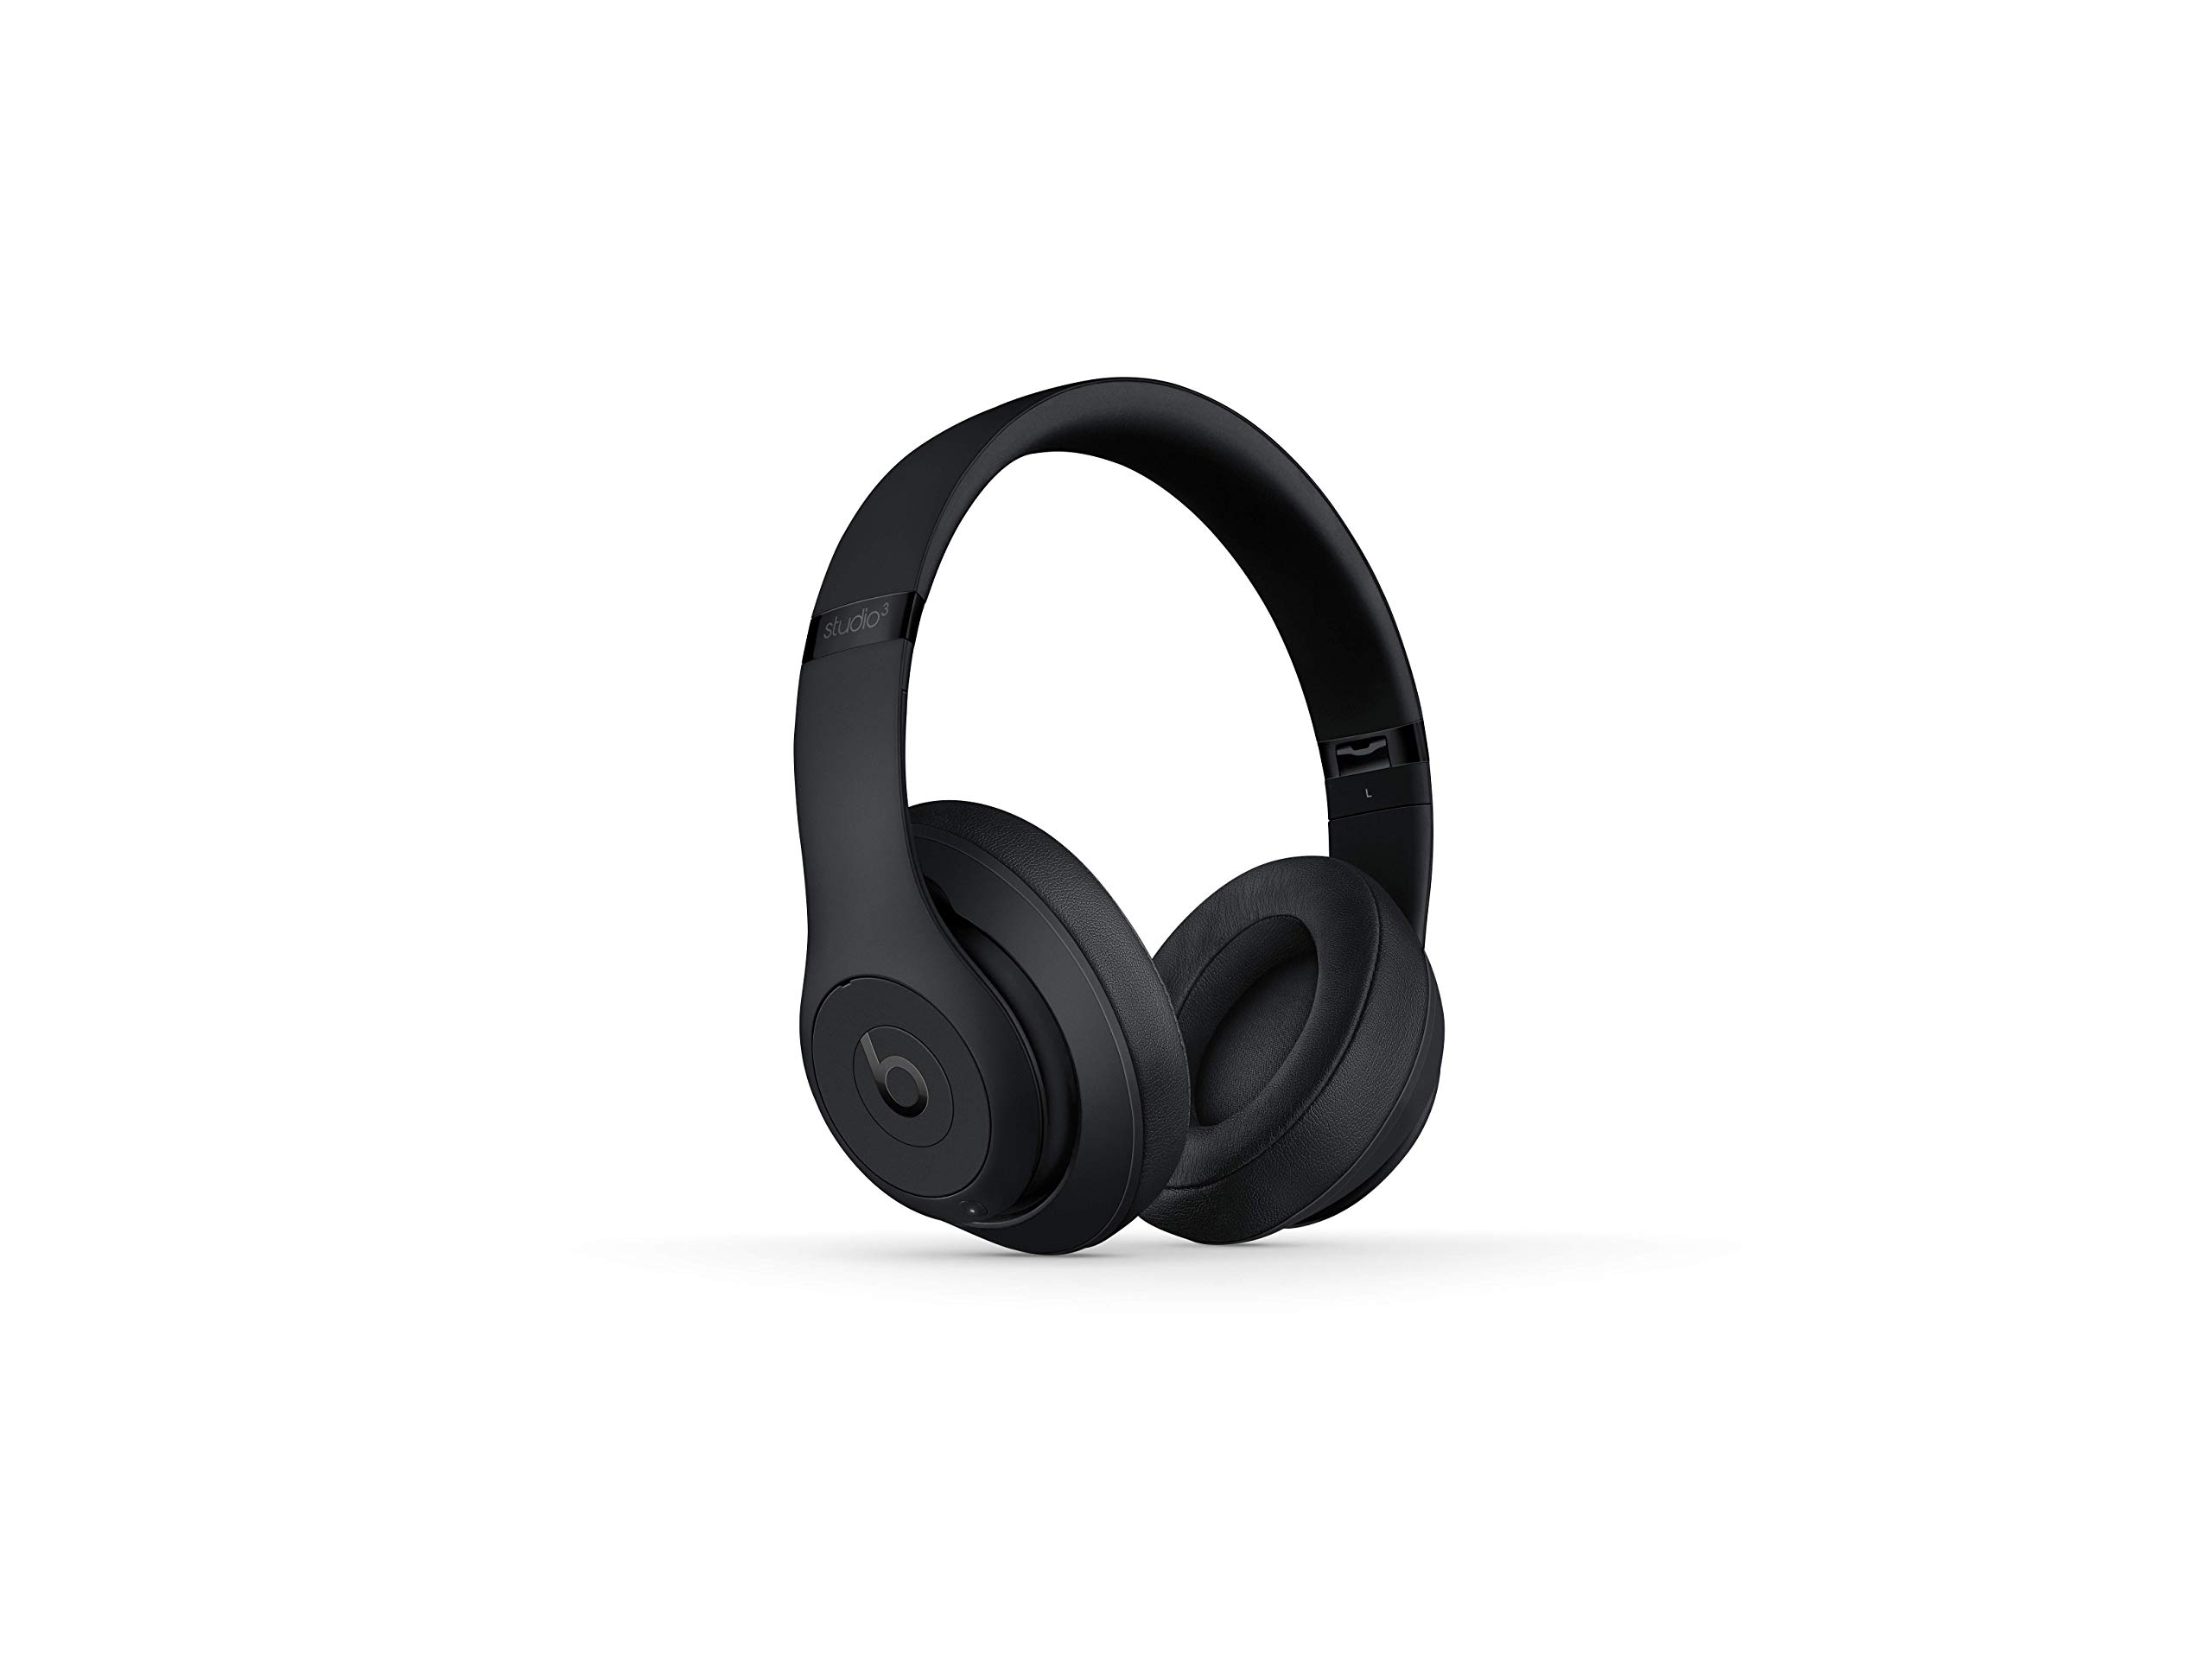 Beats Studio3 Wireless Noise Cancelling Over-Ear Headphones - Apple W1 Headphone Chip, Class 1 Bluetooth, Active Noise Cancelling, 22 Hours of Listening Time - Matte Black (Previous Model)